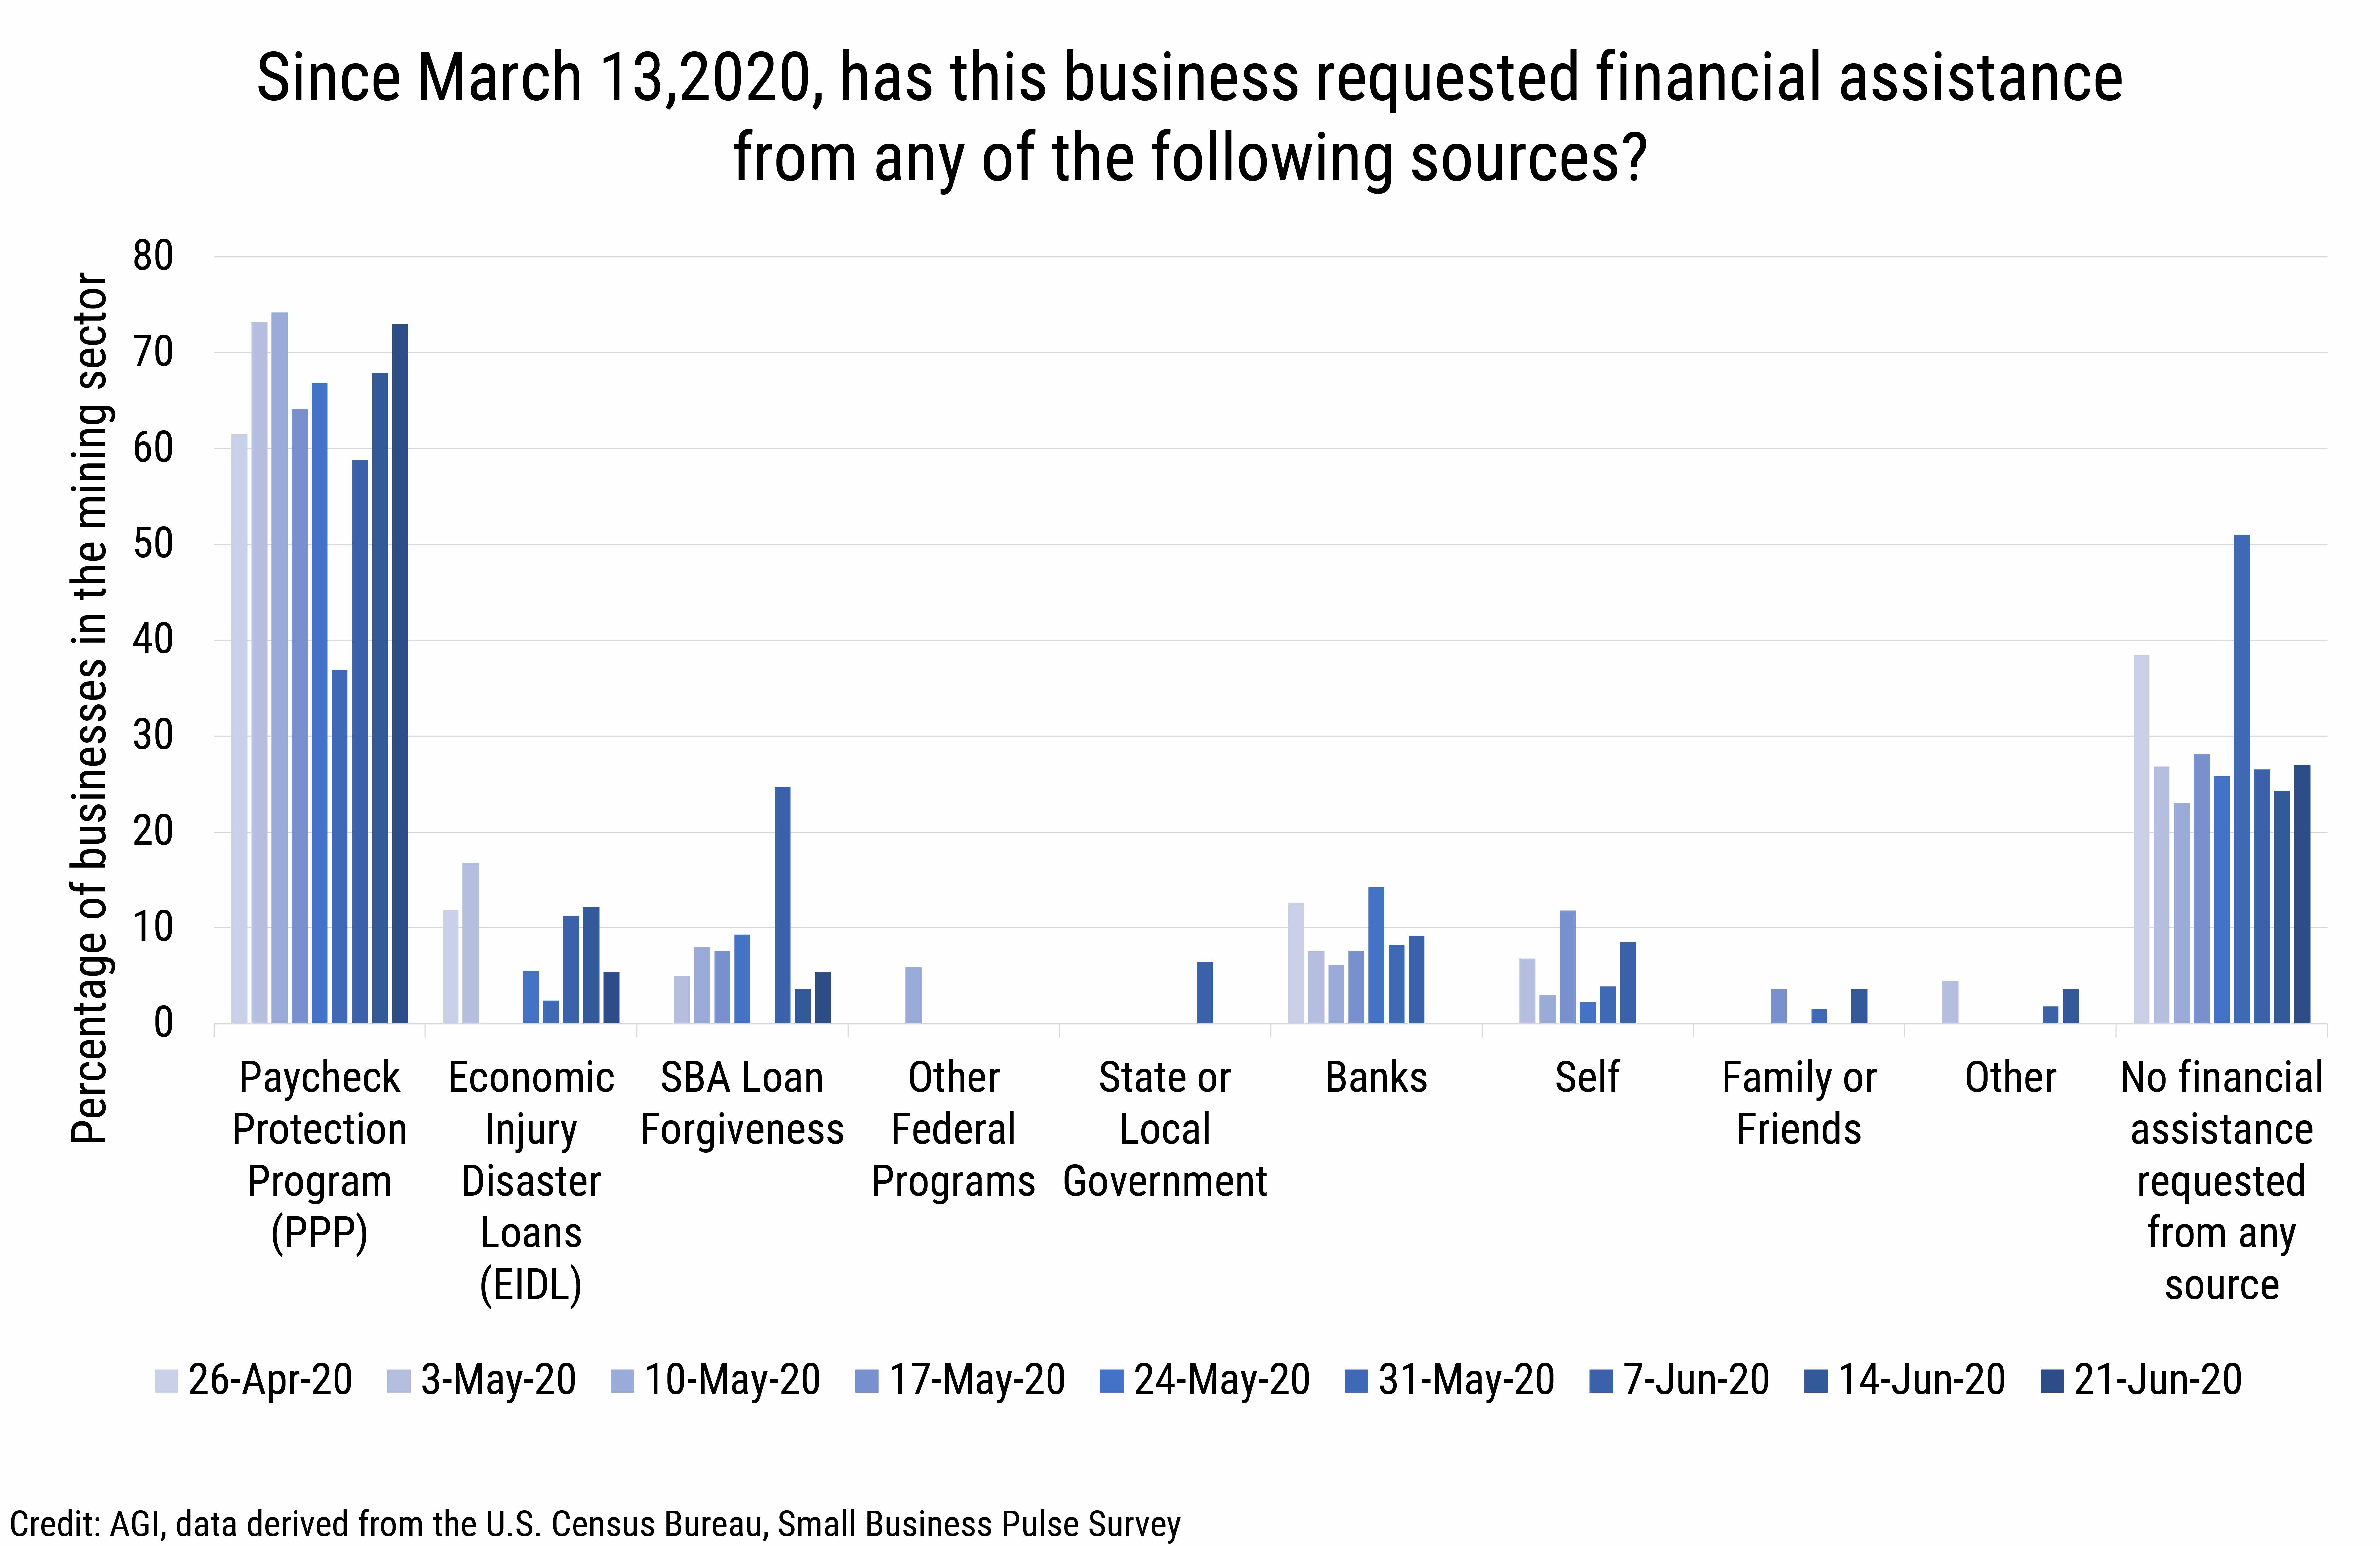 DB_2020-015_chart06 - Mining sector: Sources of requested financial assistance (credit: AGI, data derived from the U.S. Census Bureau, Small Business Pulse Survey)